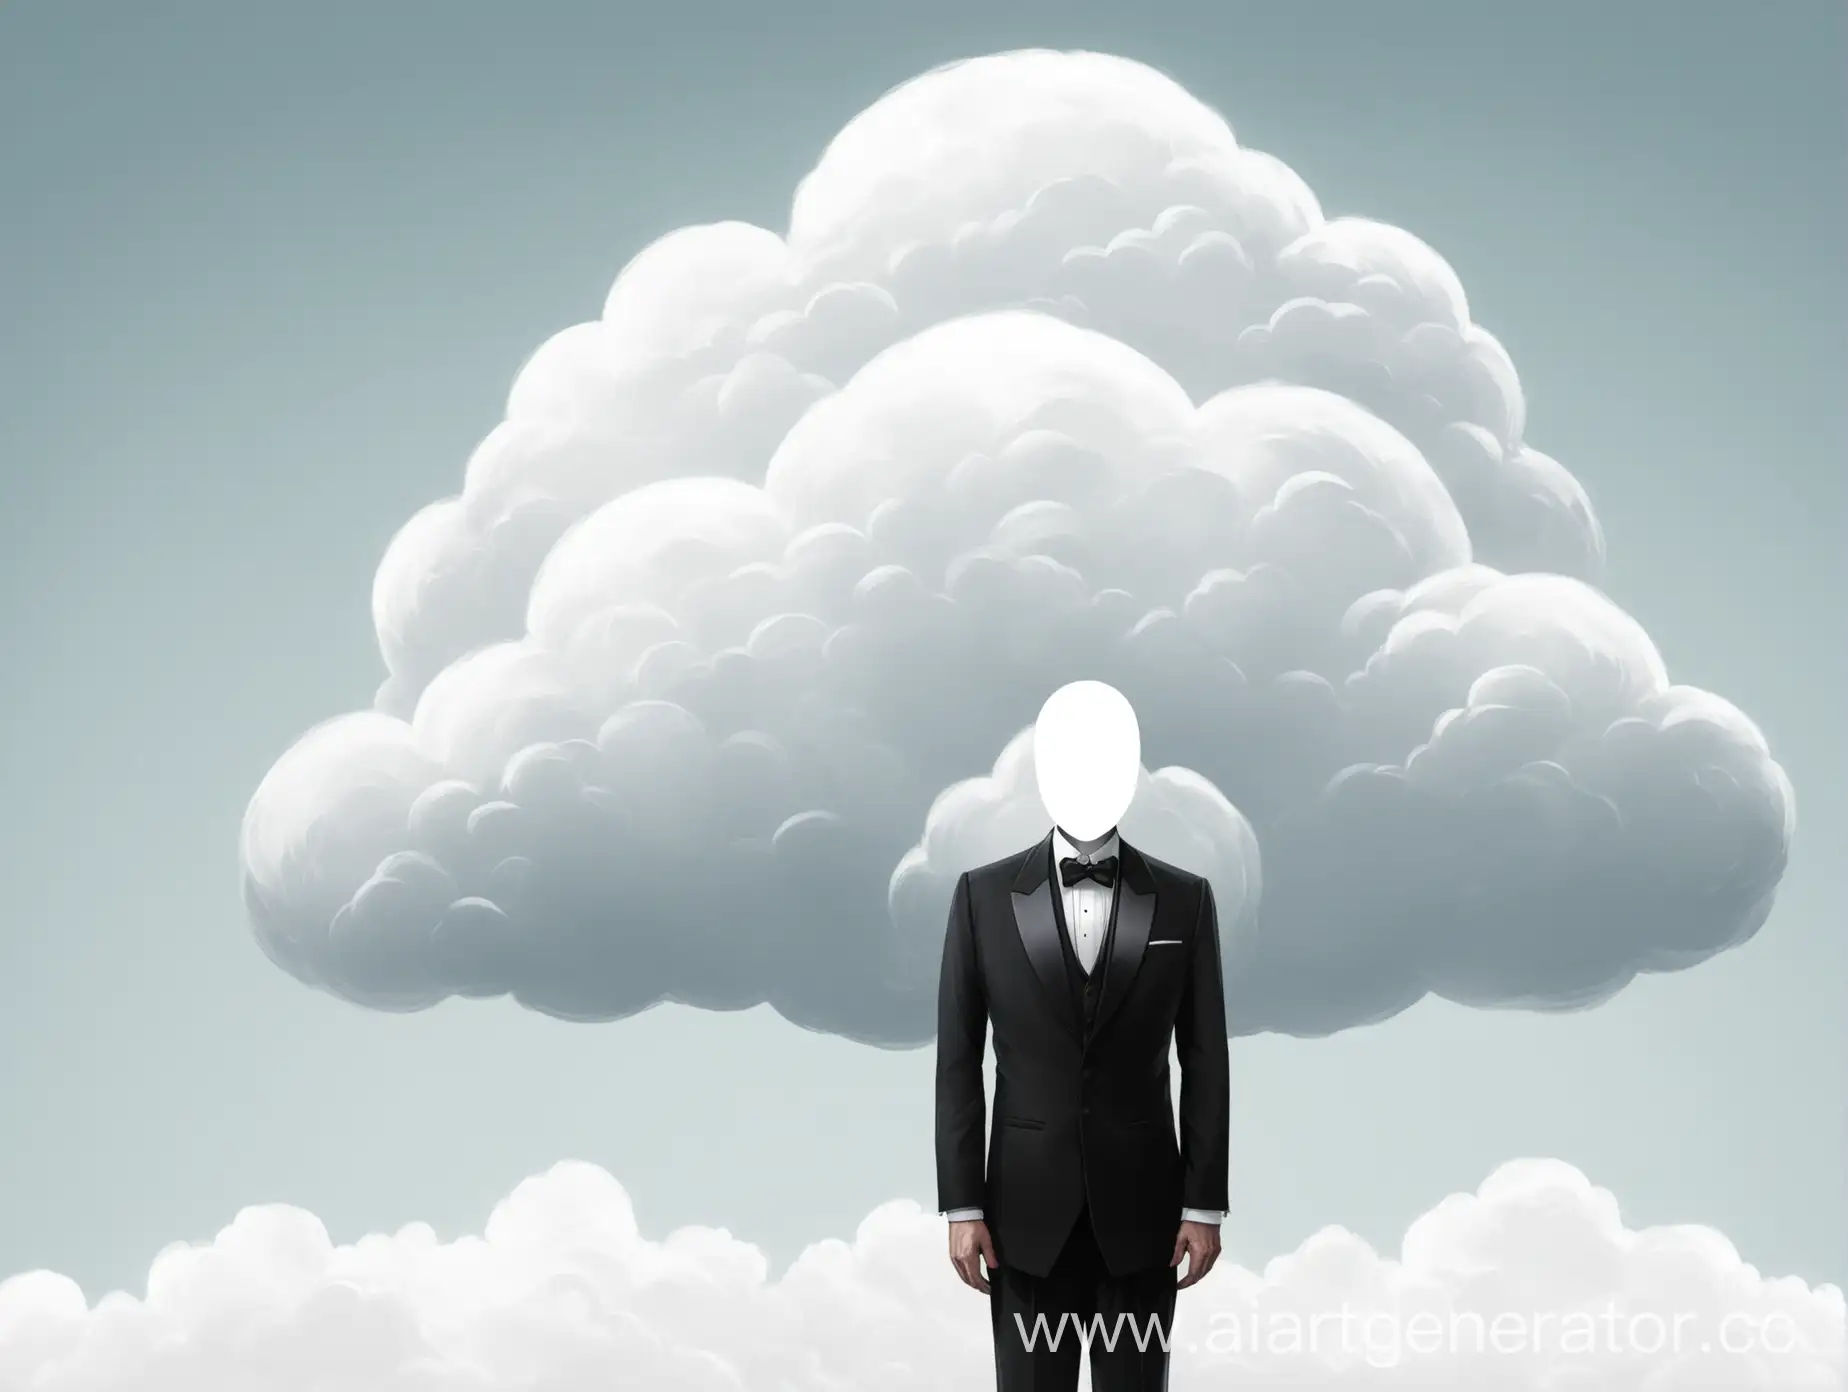  A man in a tuxedo, a cloud instead of a head (without a face), the background is white.
